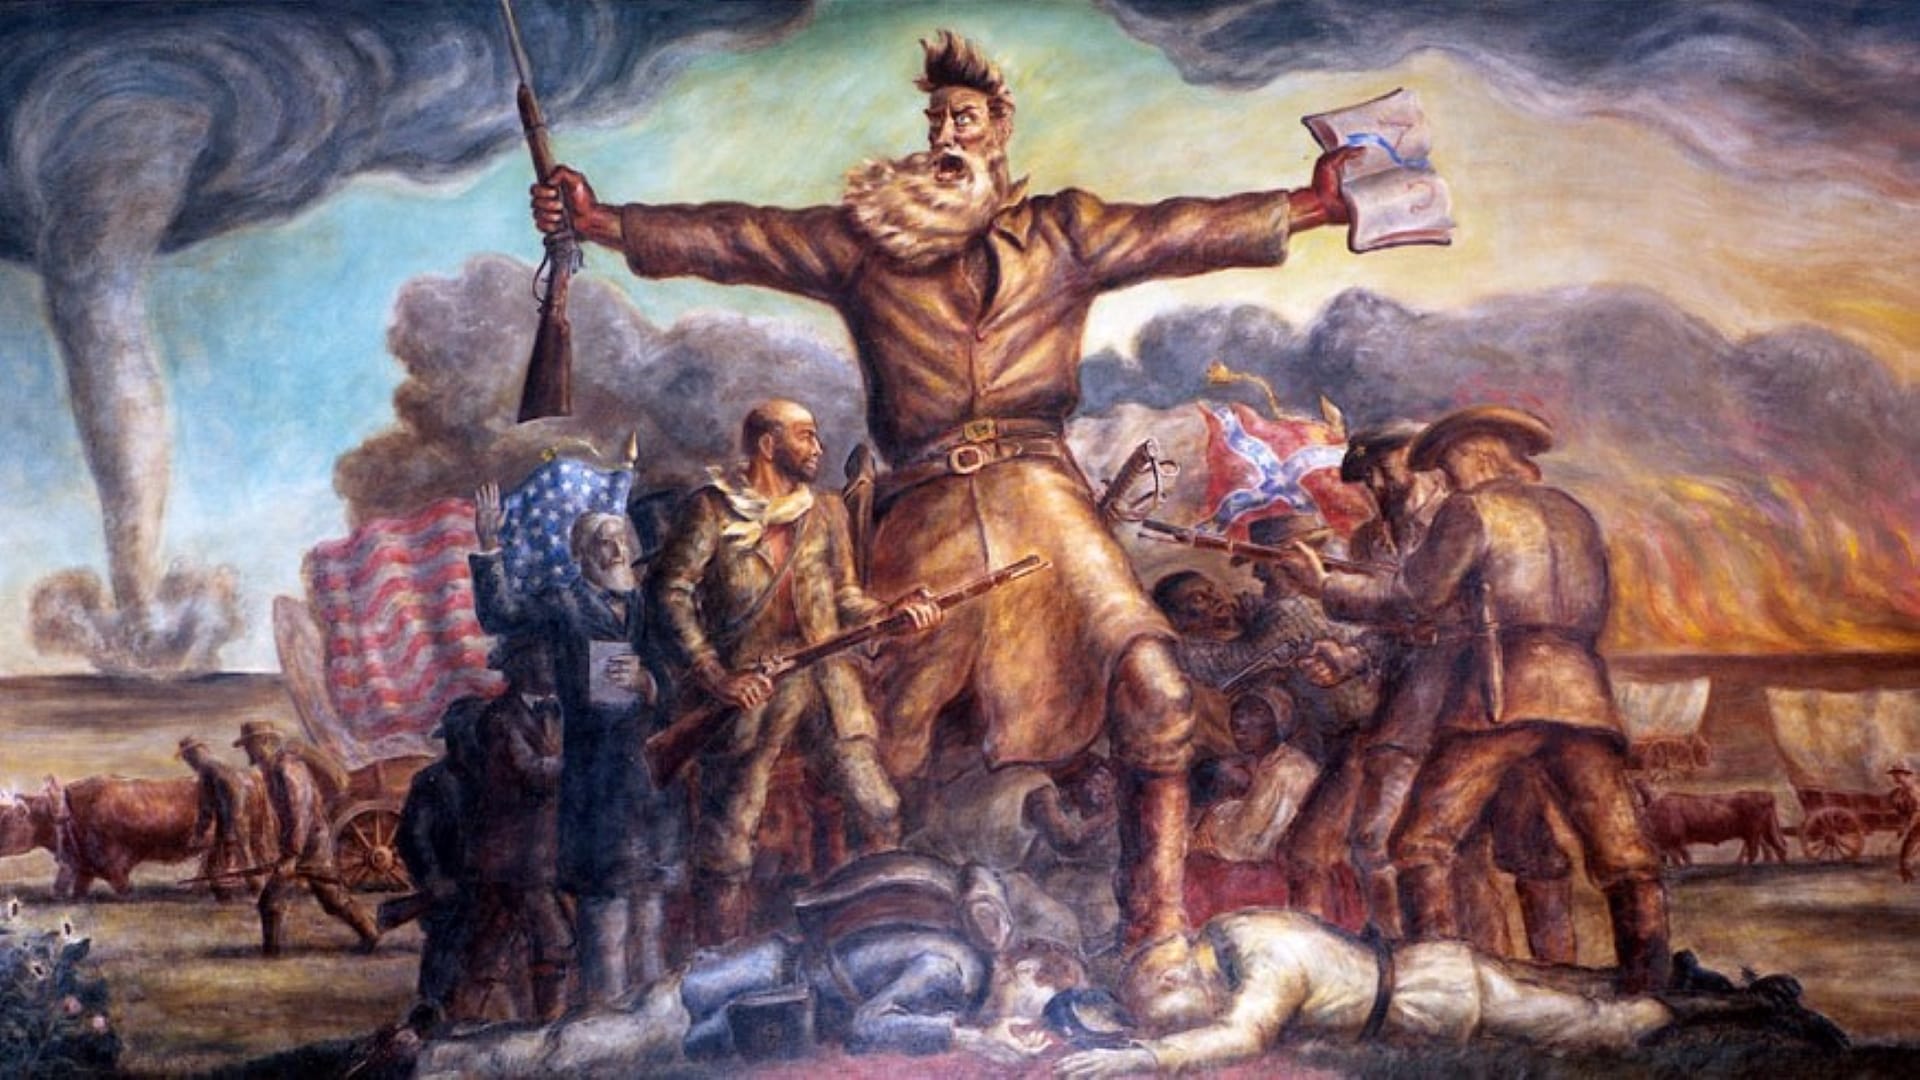 Left-Wing Groups Take Up Arms in Name of Abolitionist John Brown